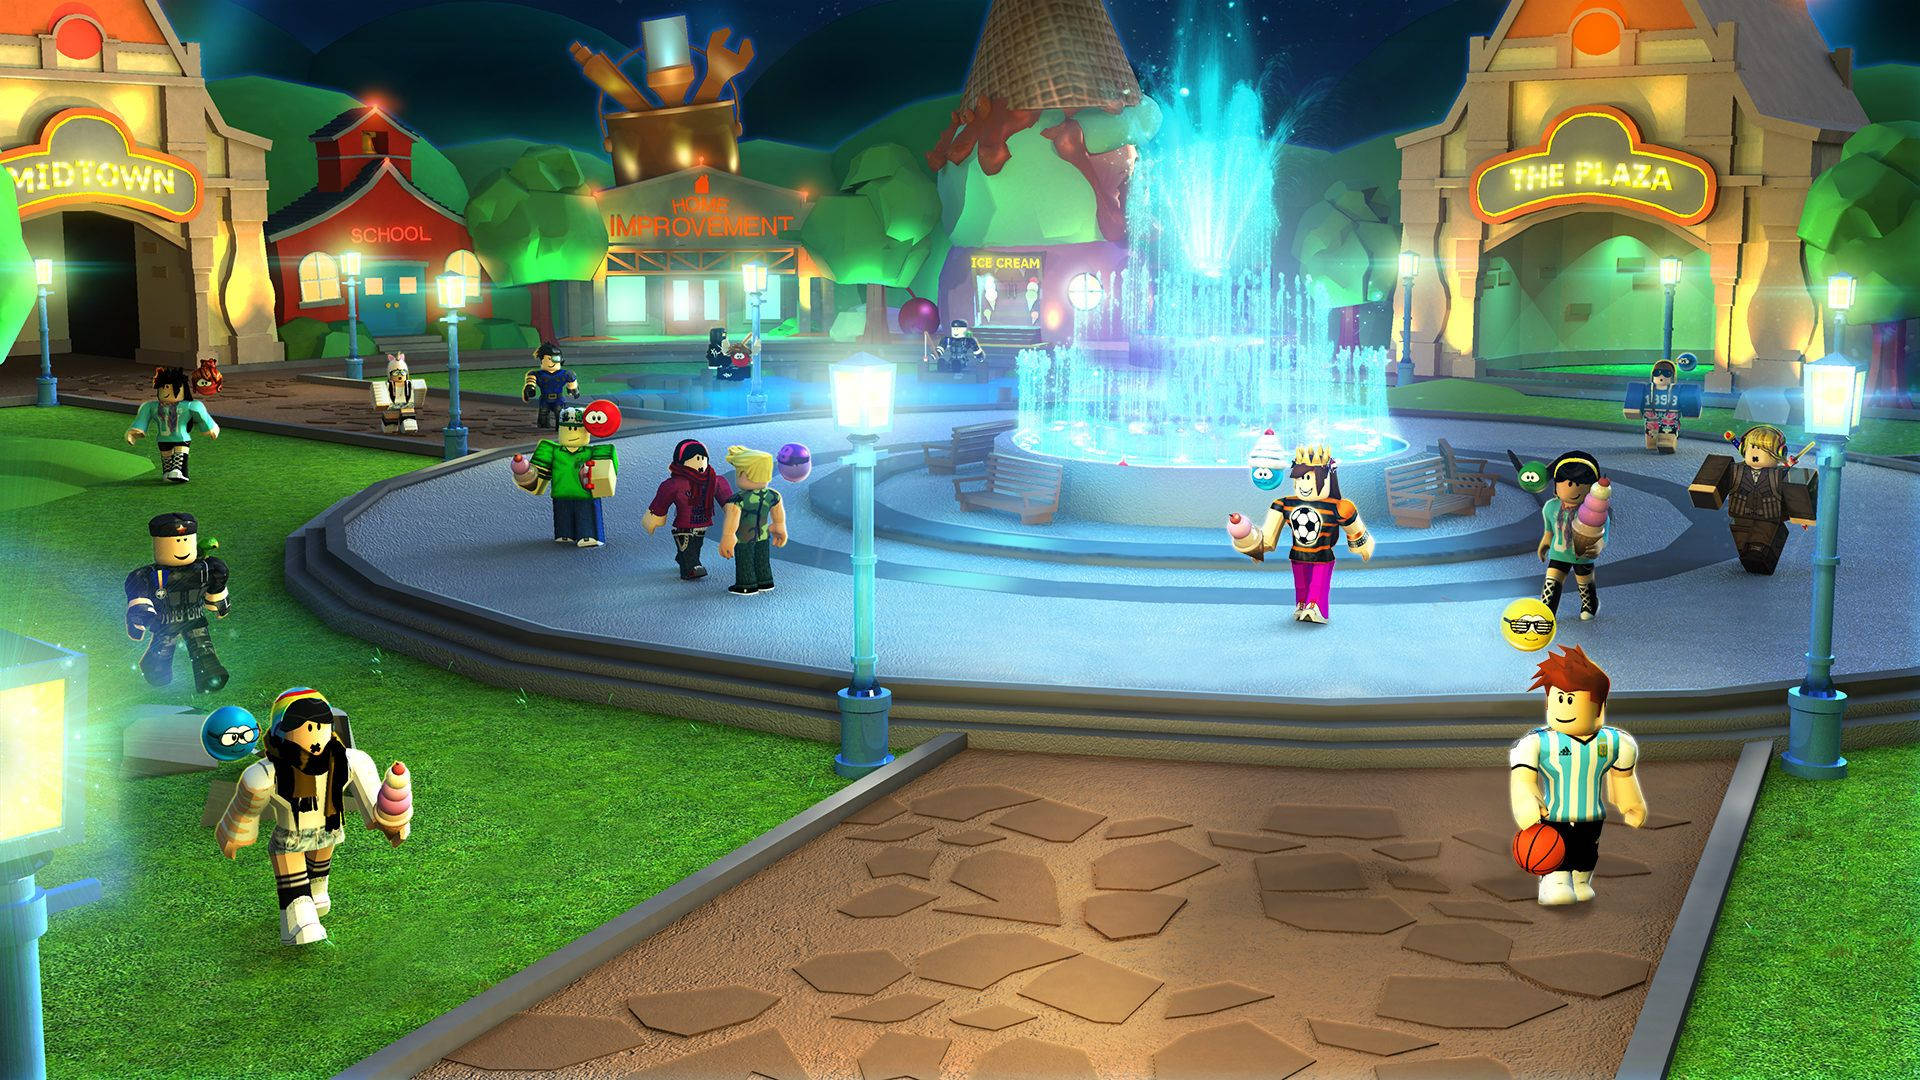 Grab Your Friends And Come Join The Fun At The Roblox Plaza!